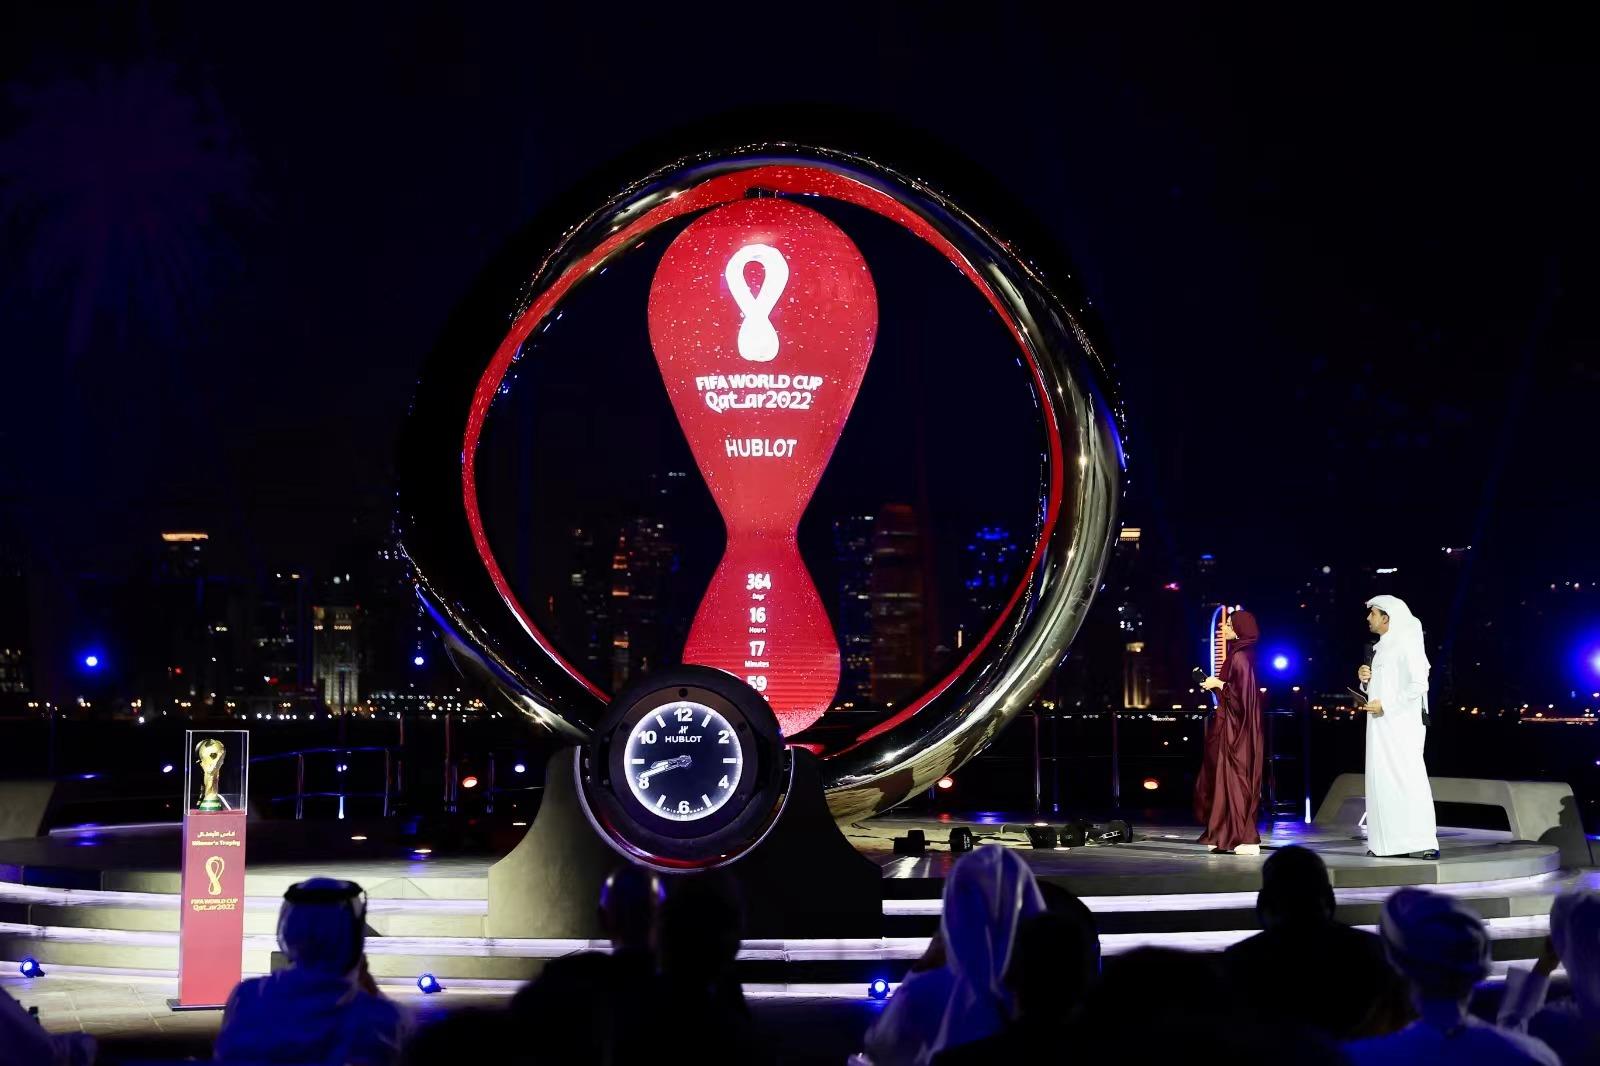 Countdown clock for the 2022 Qatar World Cup starts timing